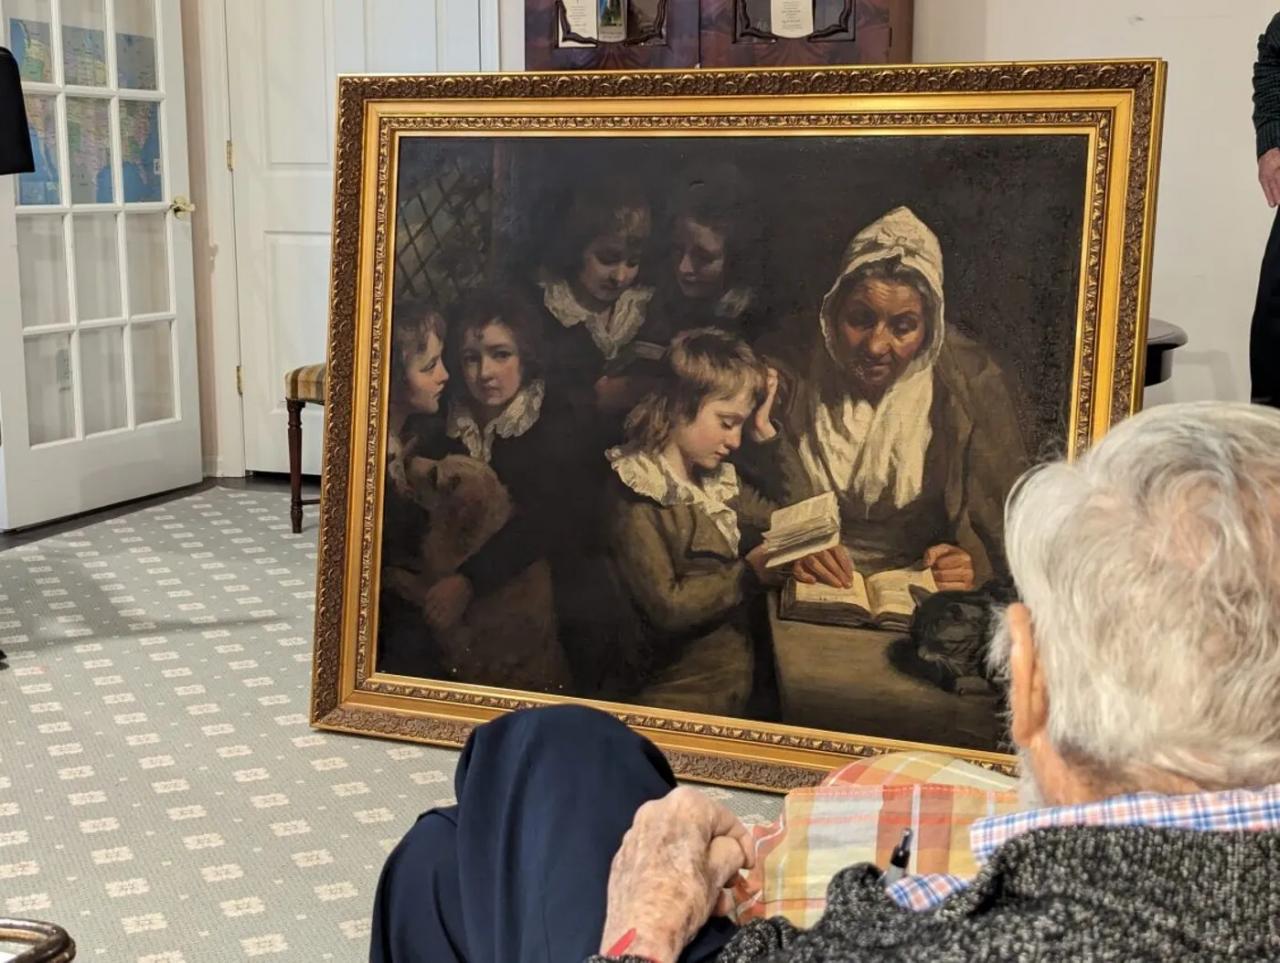 John Opie Painting Recovered and Returned 50 Years After Theft